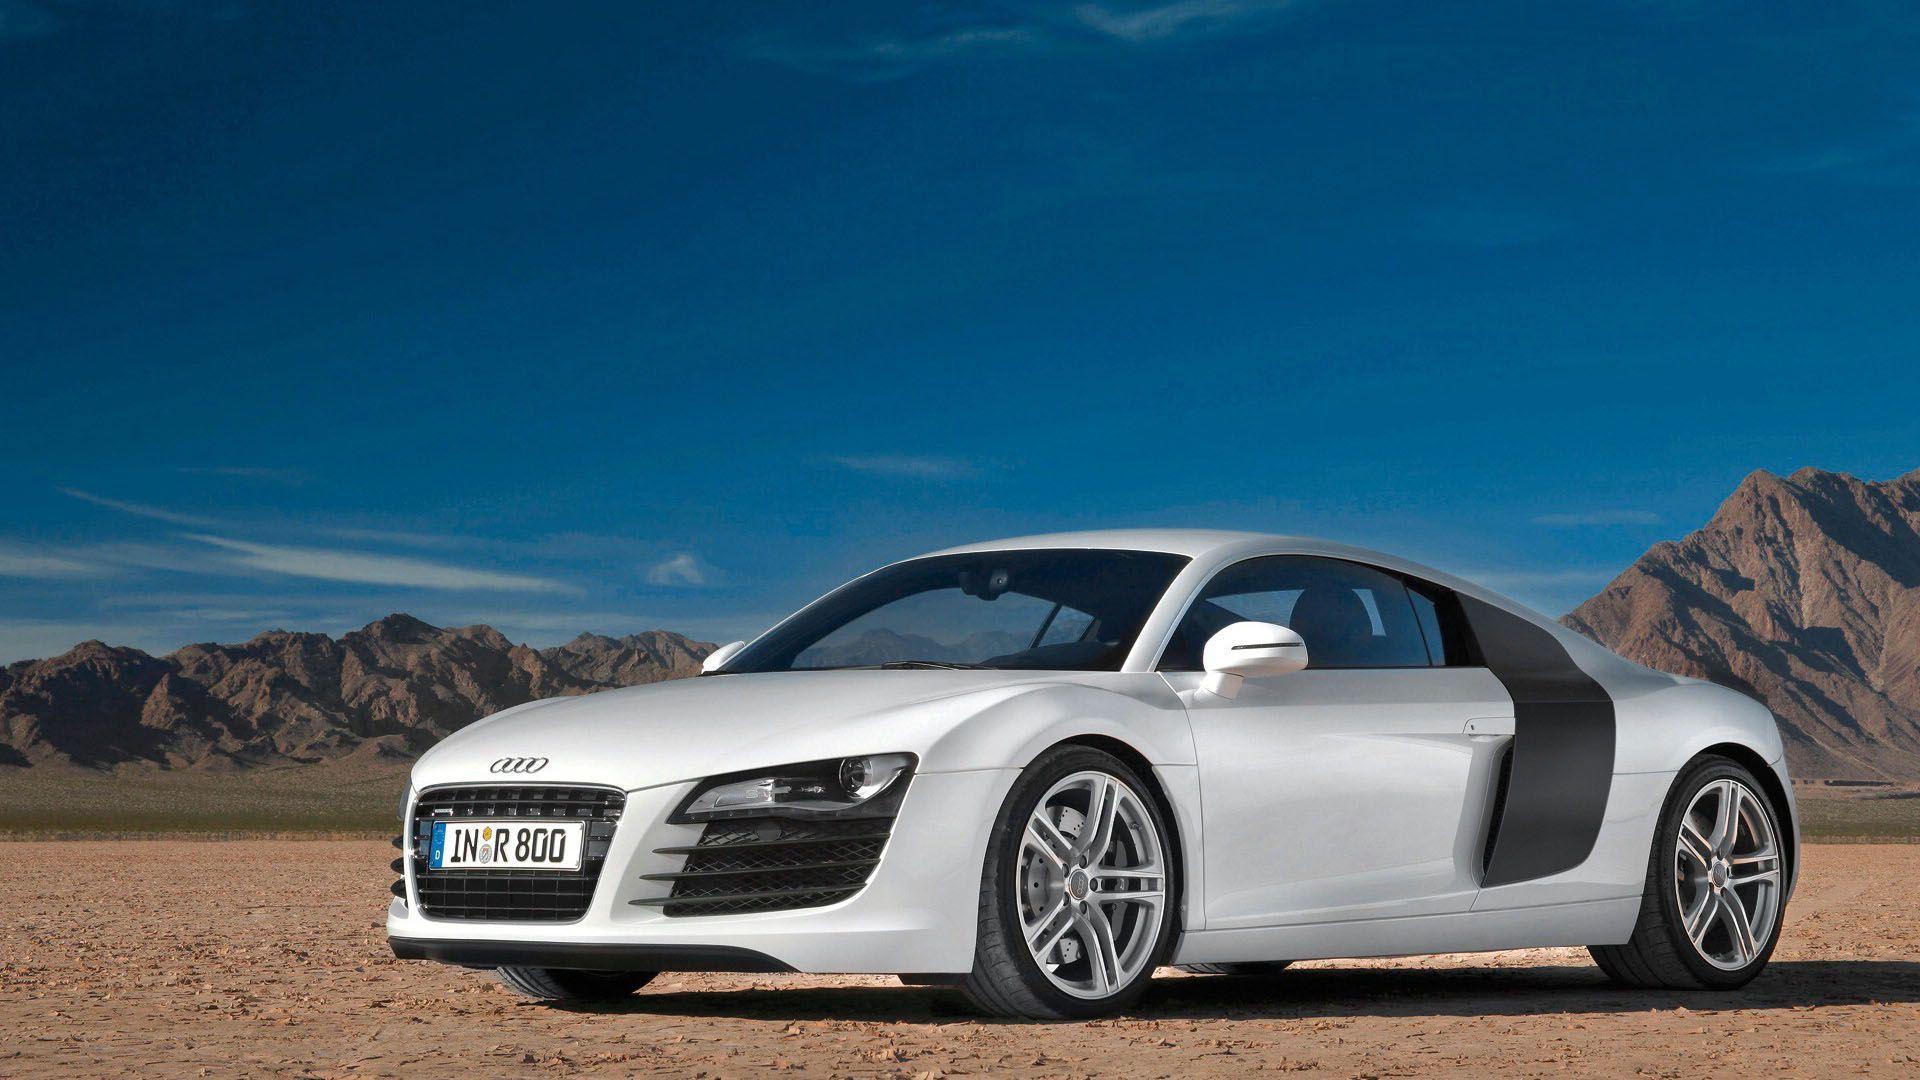 Nothing found for Audi R8 1080P Wallpaper HD Wallpaper